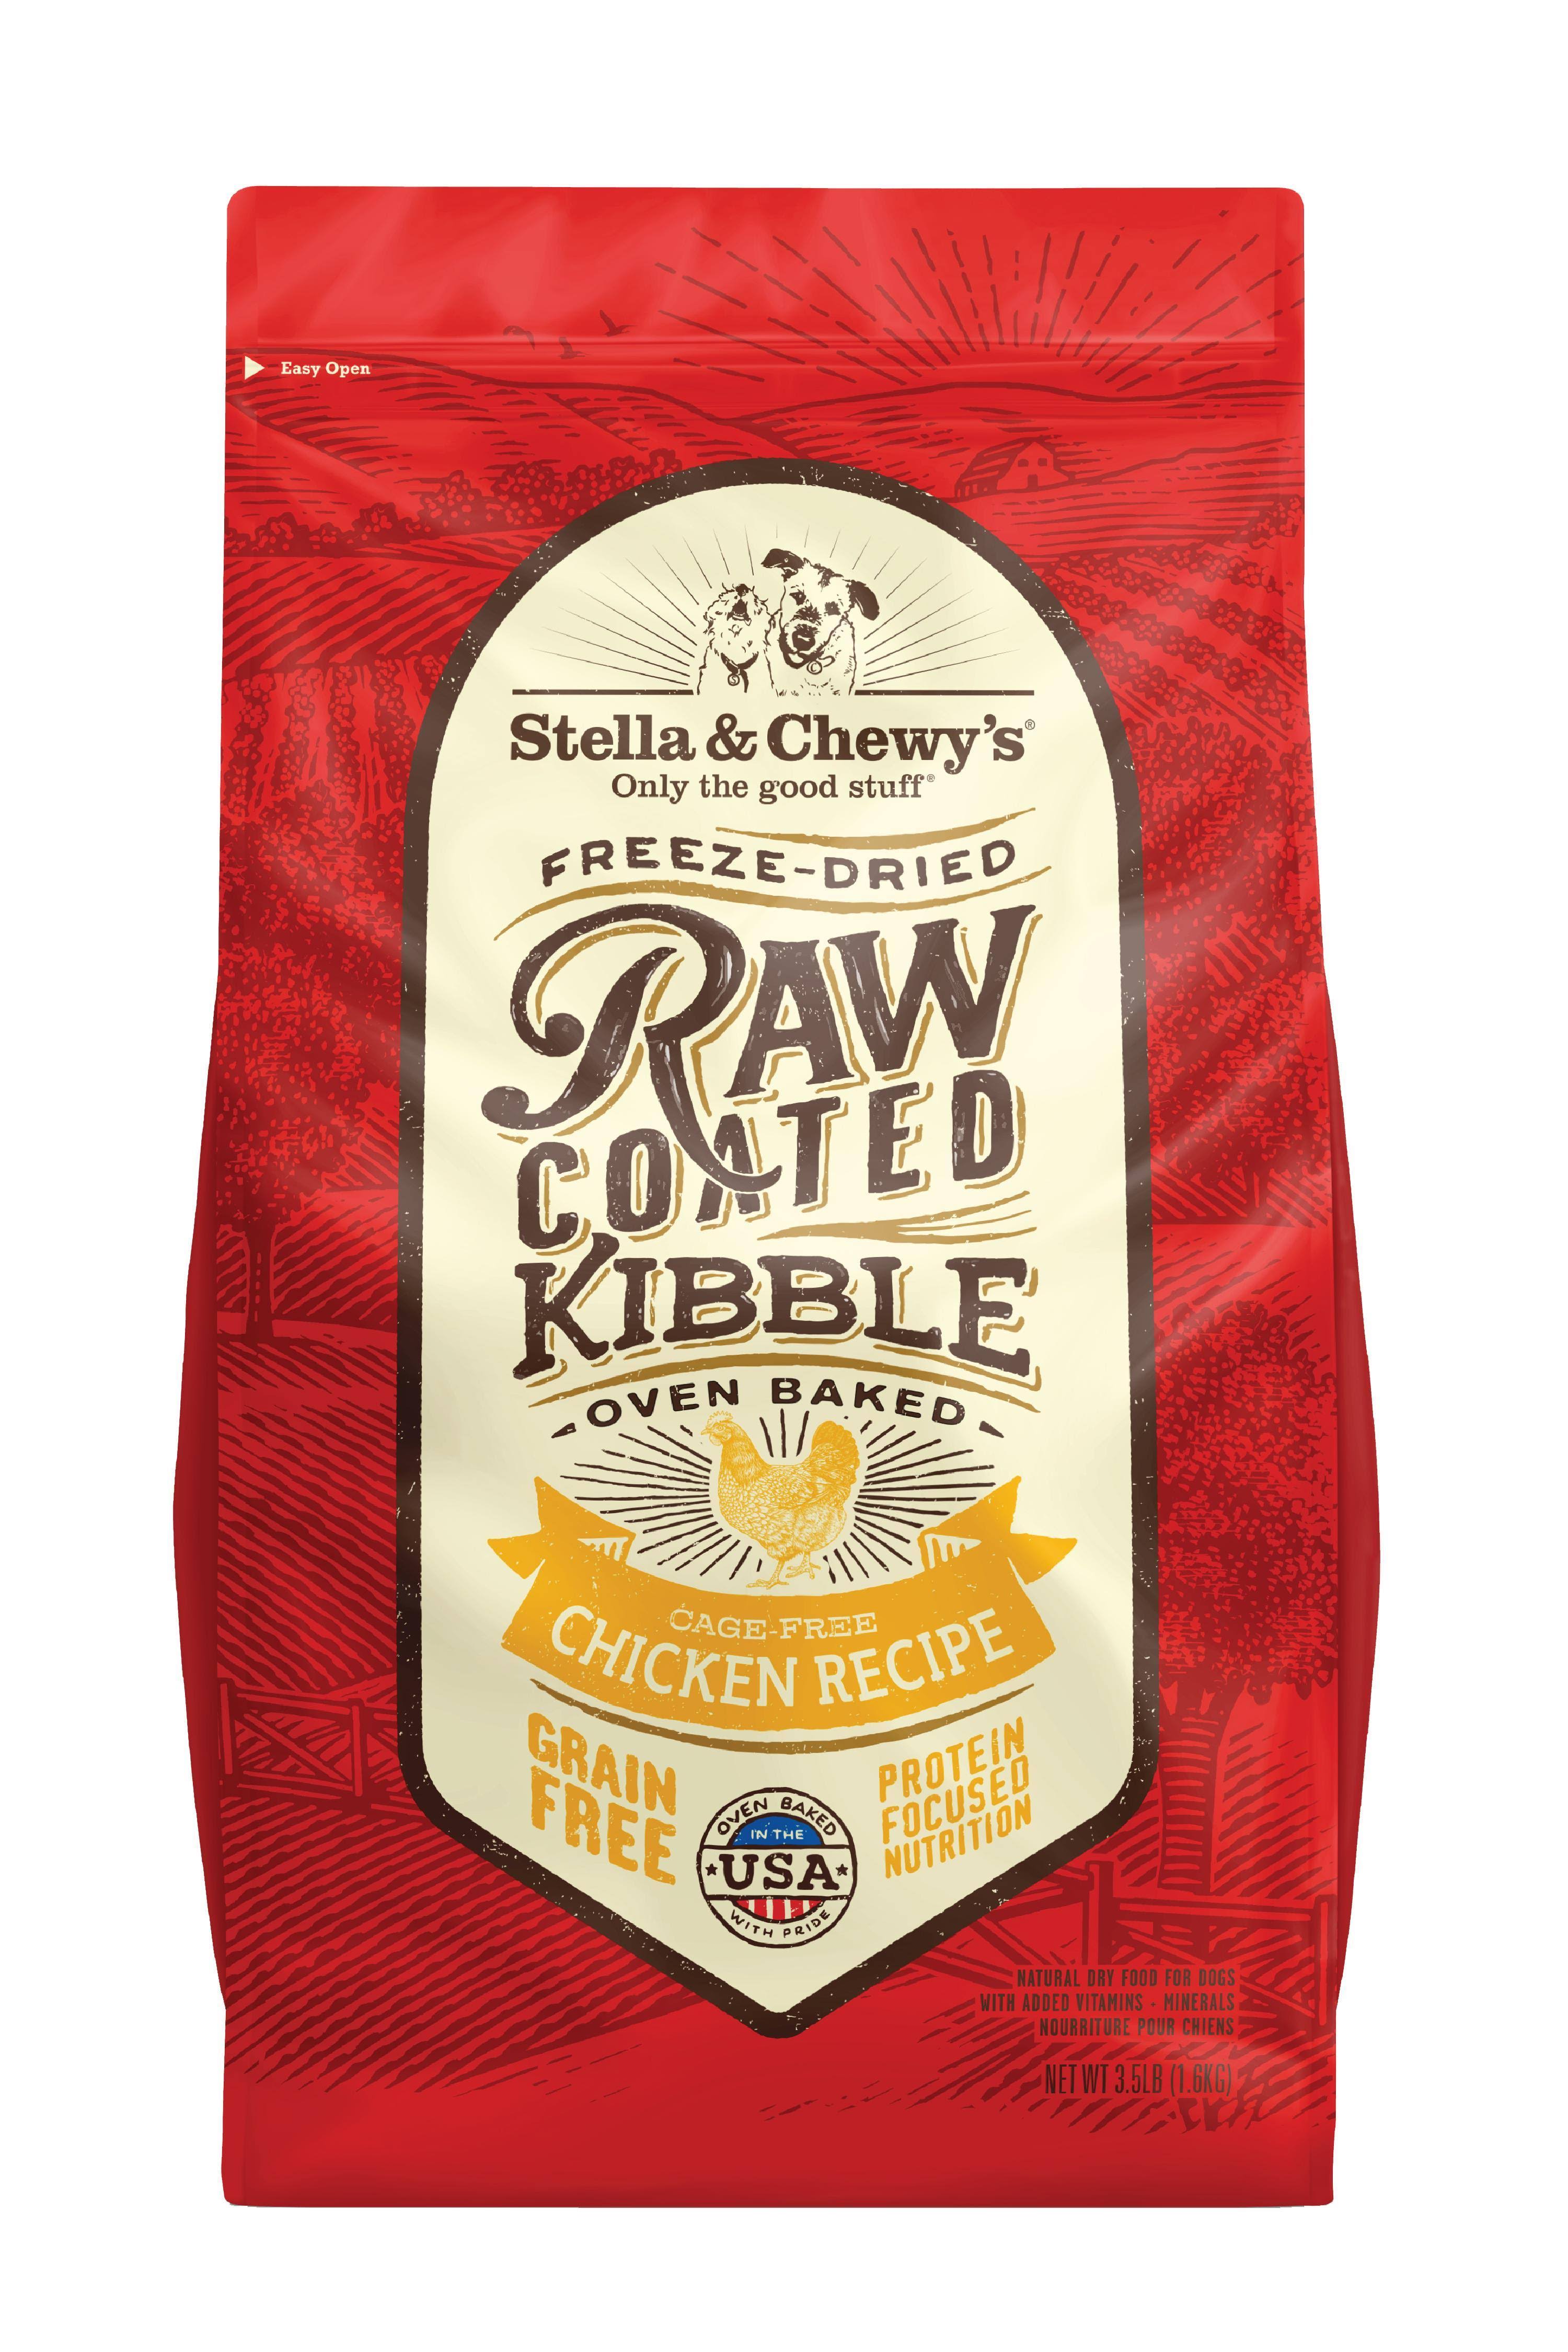 Stella & Chewy's Raw Coated Kibble Cage-Free Chicken Recipe Grain-Free Dry Dog Food 22 LB